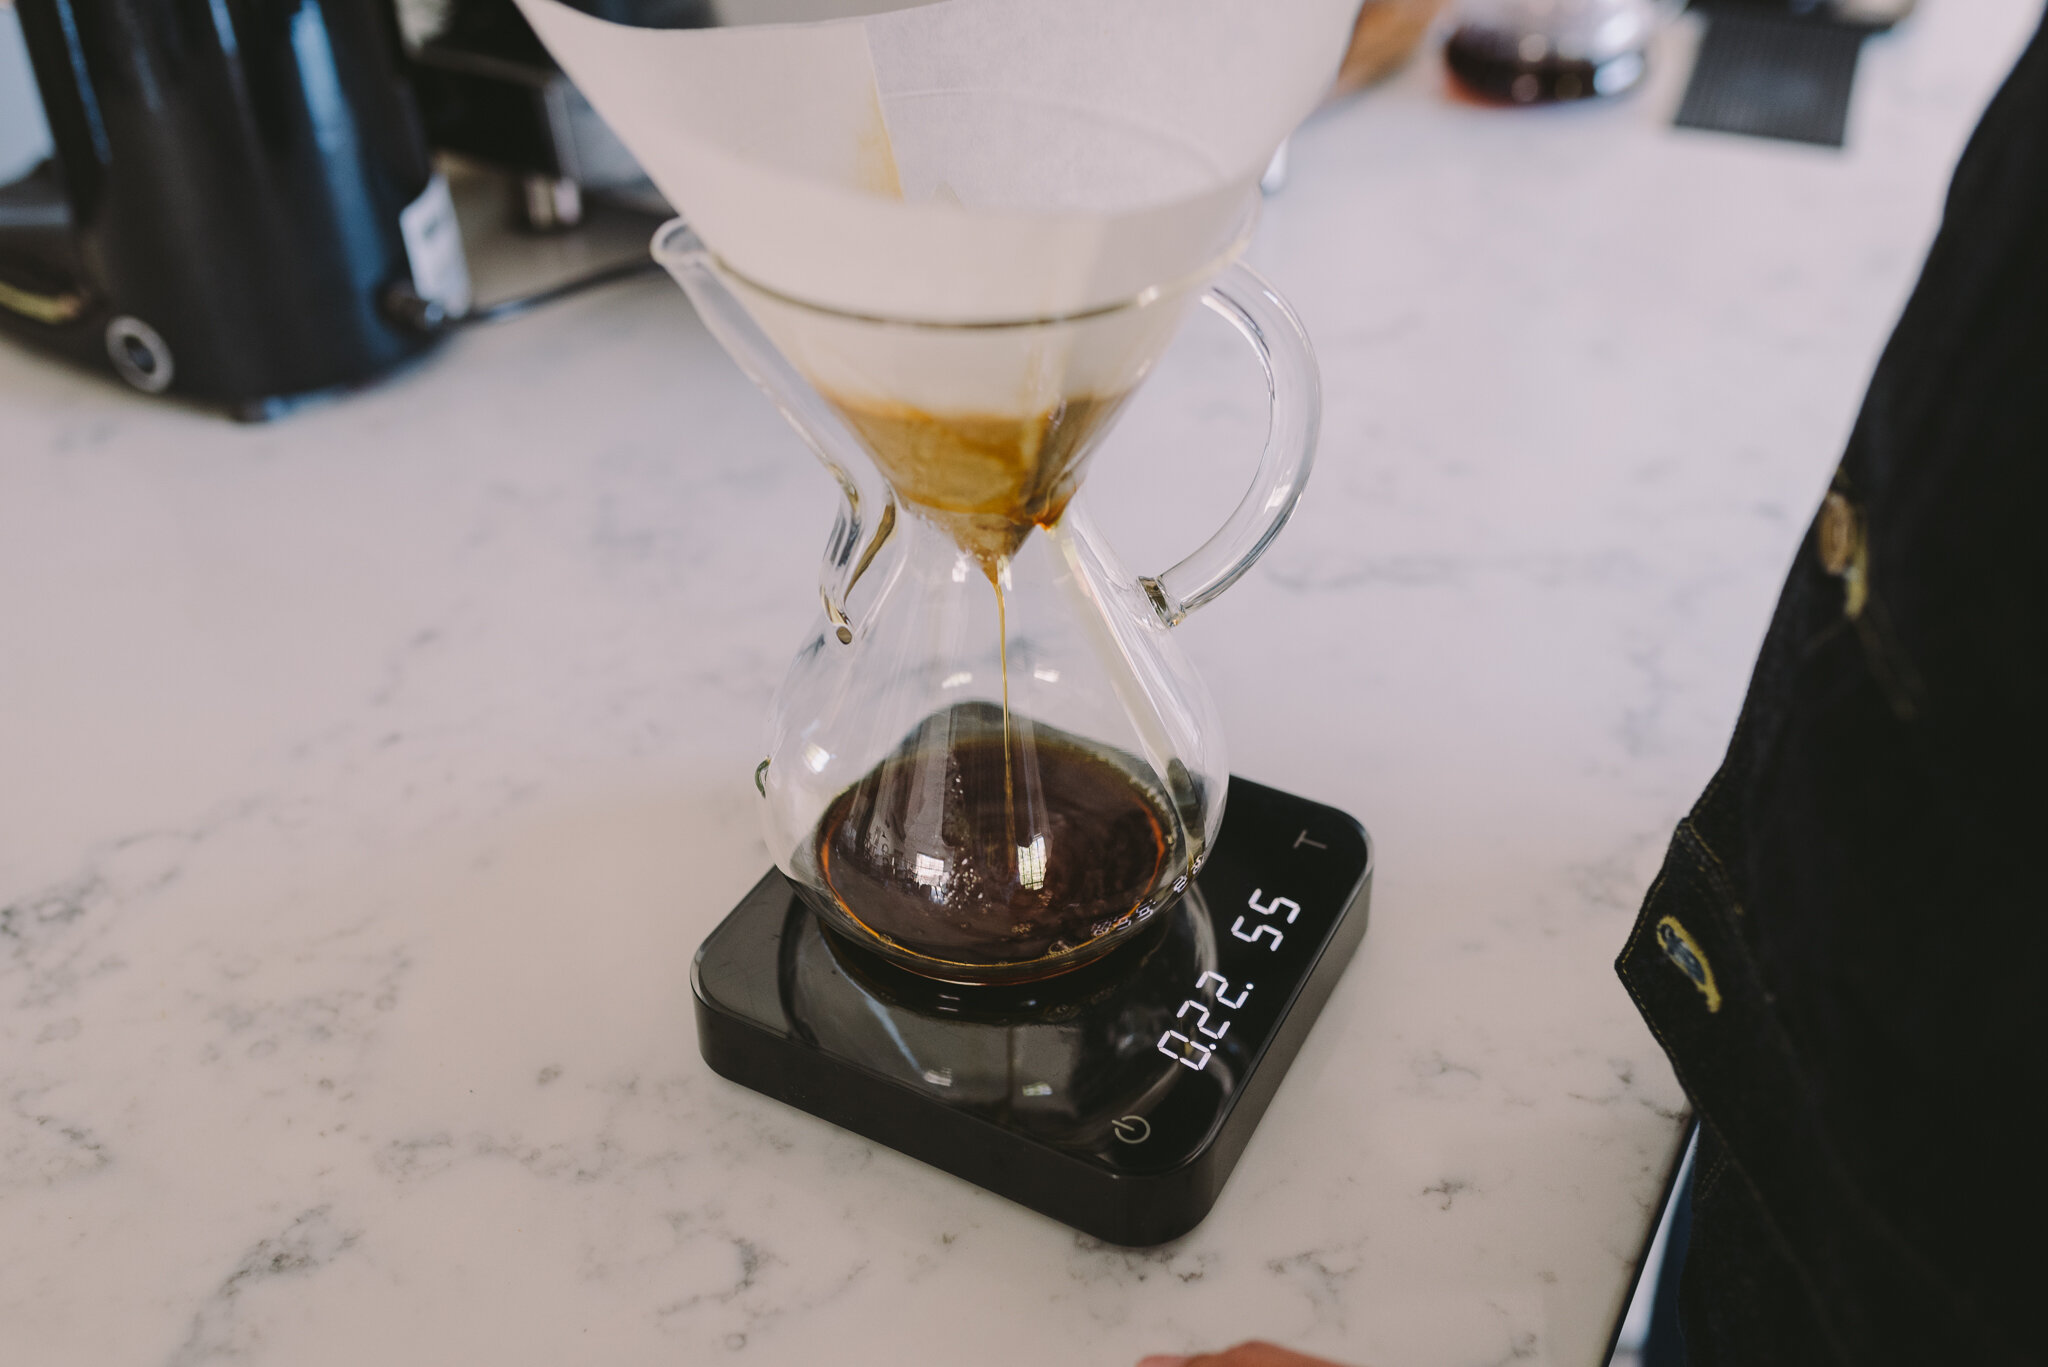 Enjoy your Hario V60. We like to serve our V60’s with some grinds on the side so customers can experience the aroma of the freshly ground single origin.